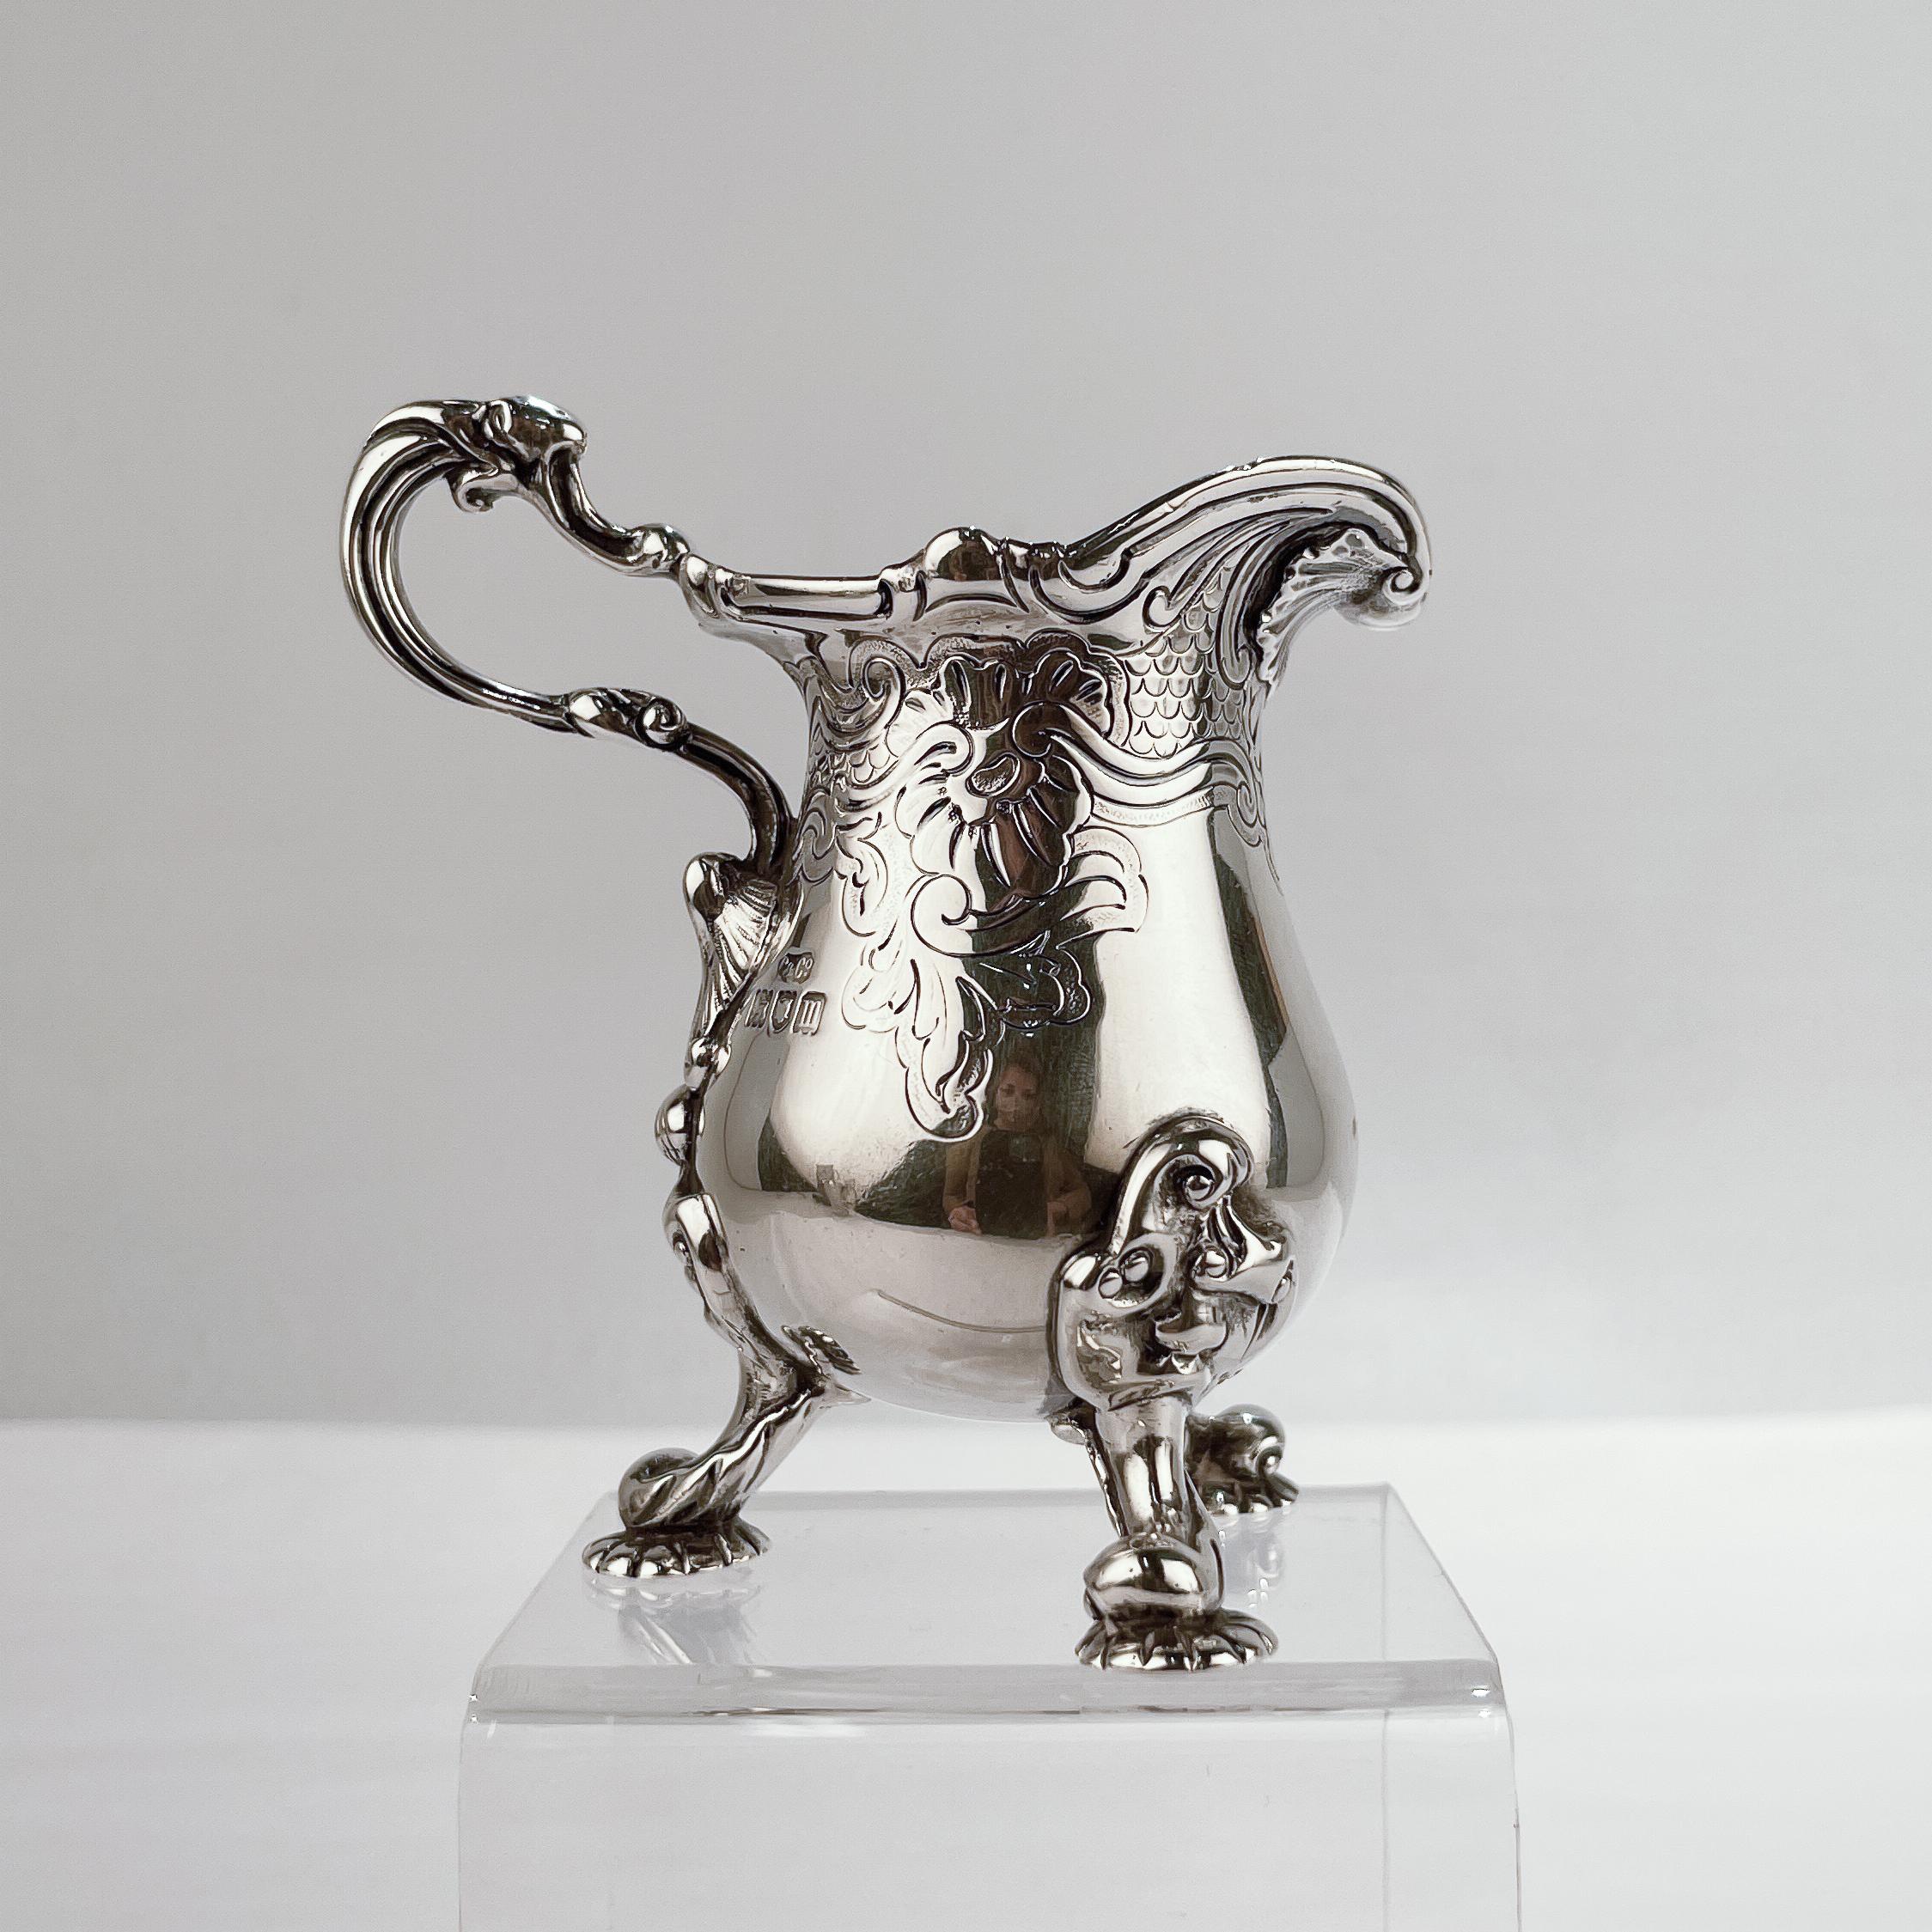 Carrington & Co. Rococo or George II Style Sterling Silver Cream Pitcher For Sale 2